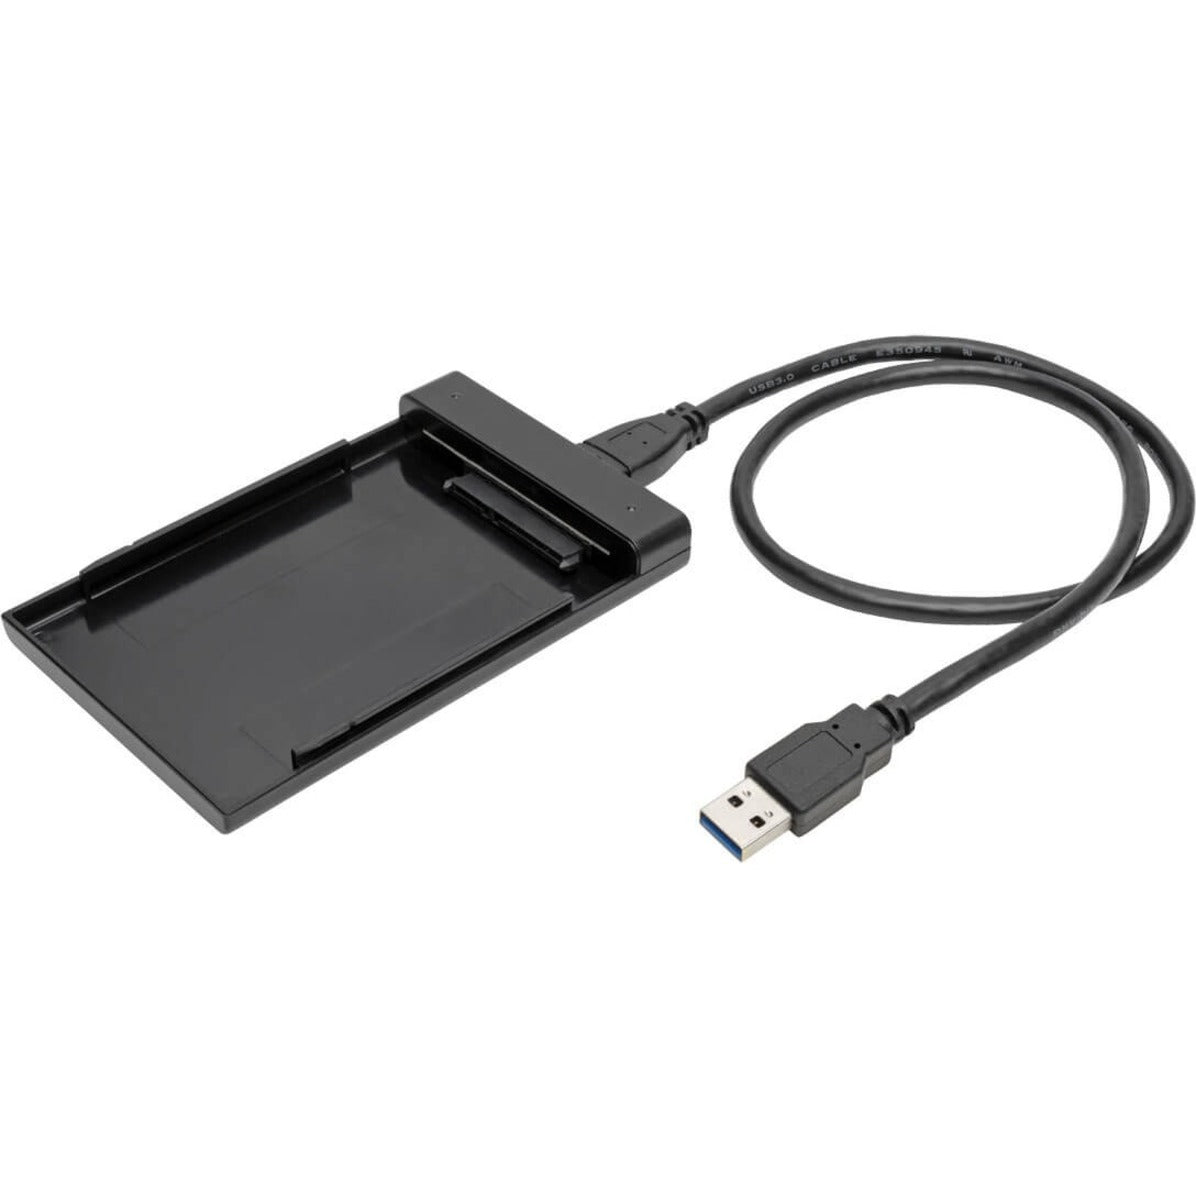 Tripp Lite USB 3.0 SuperSpeed External 2.5 in. SATA Hard Drive Enclosure with Built-In Cable and UASP Support